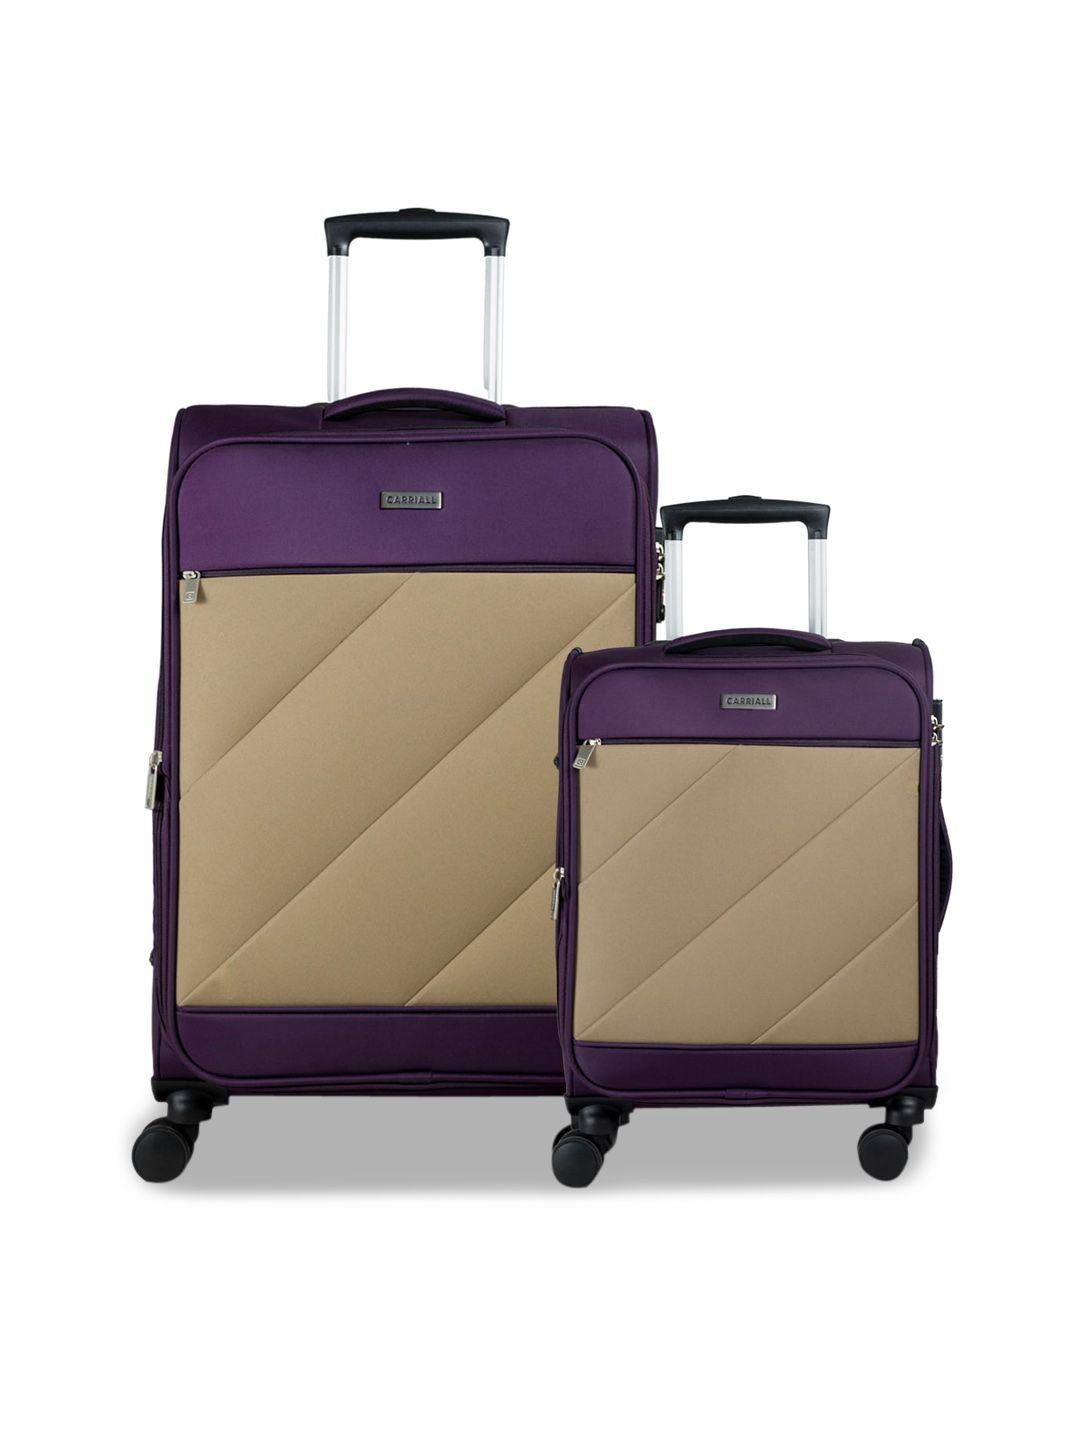 carriall set of 2 purple & beige colourblocked soft-sided trolley suitcases